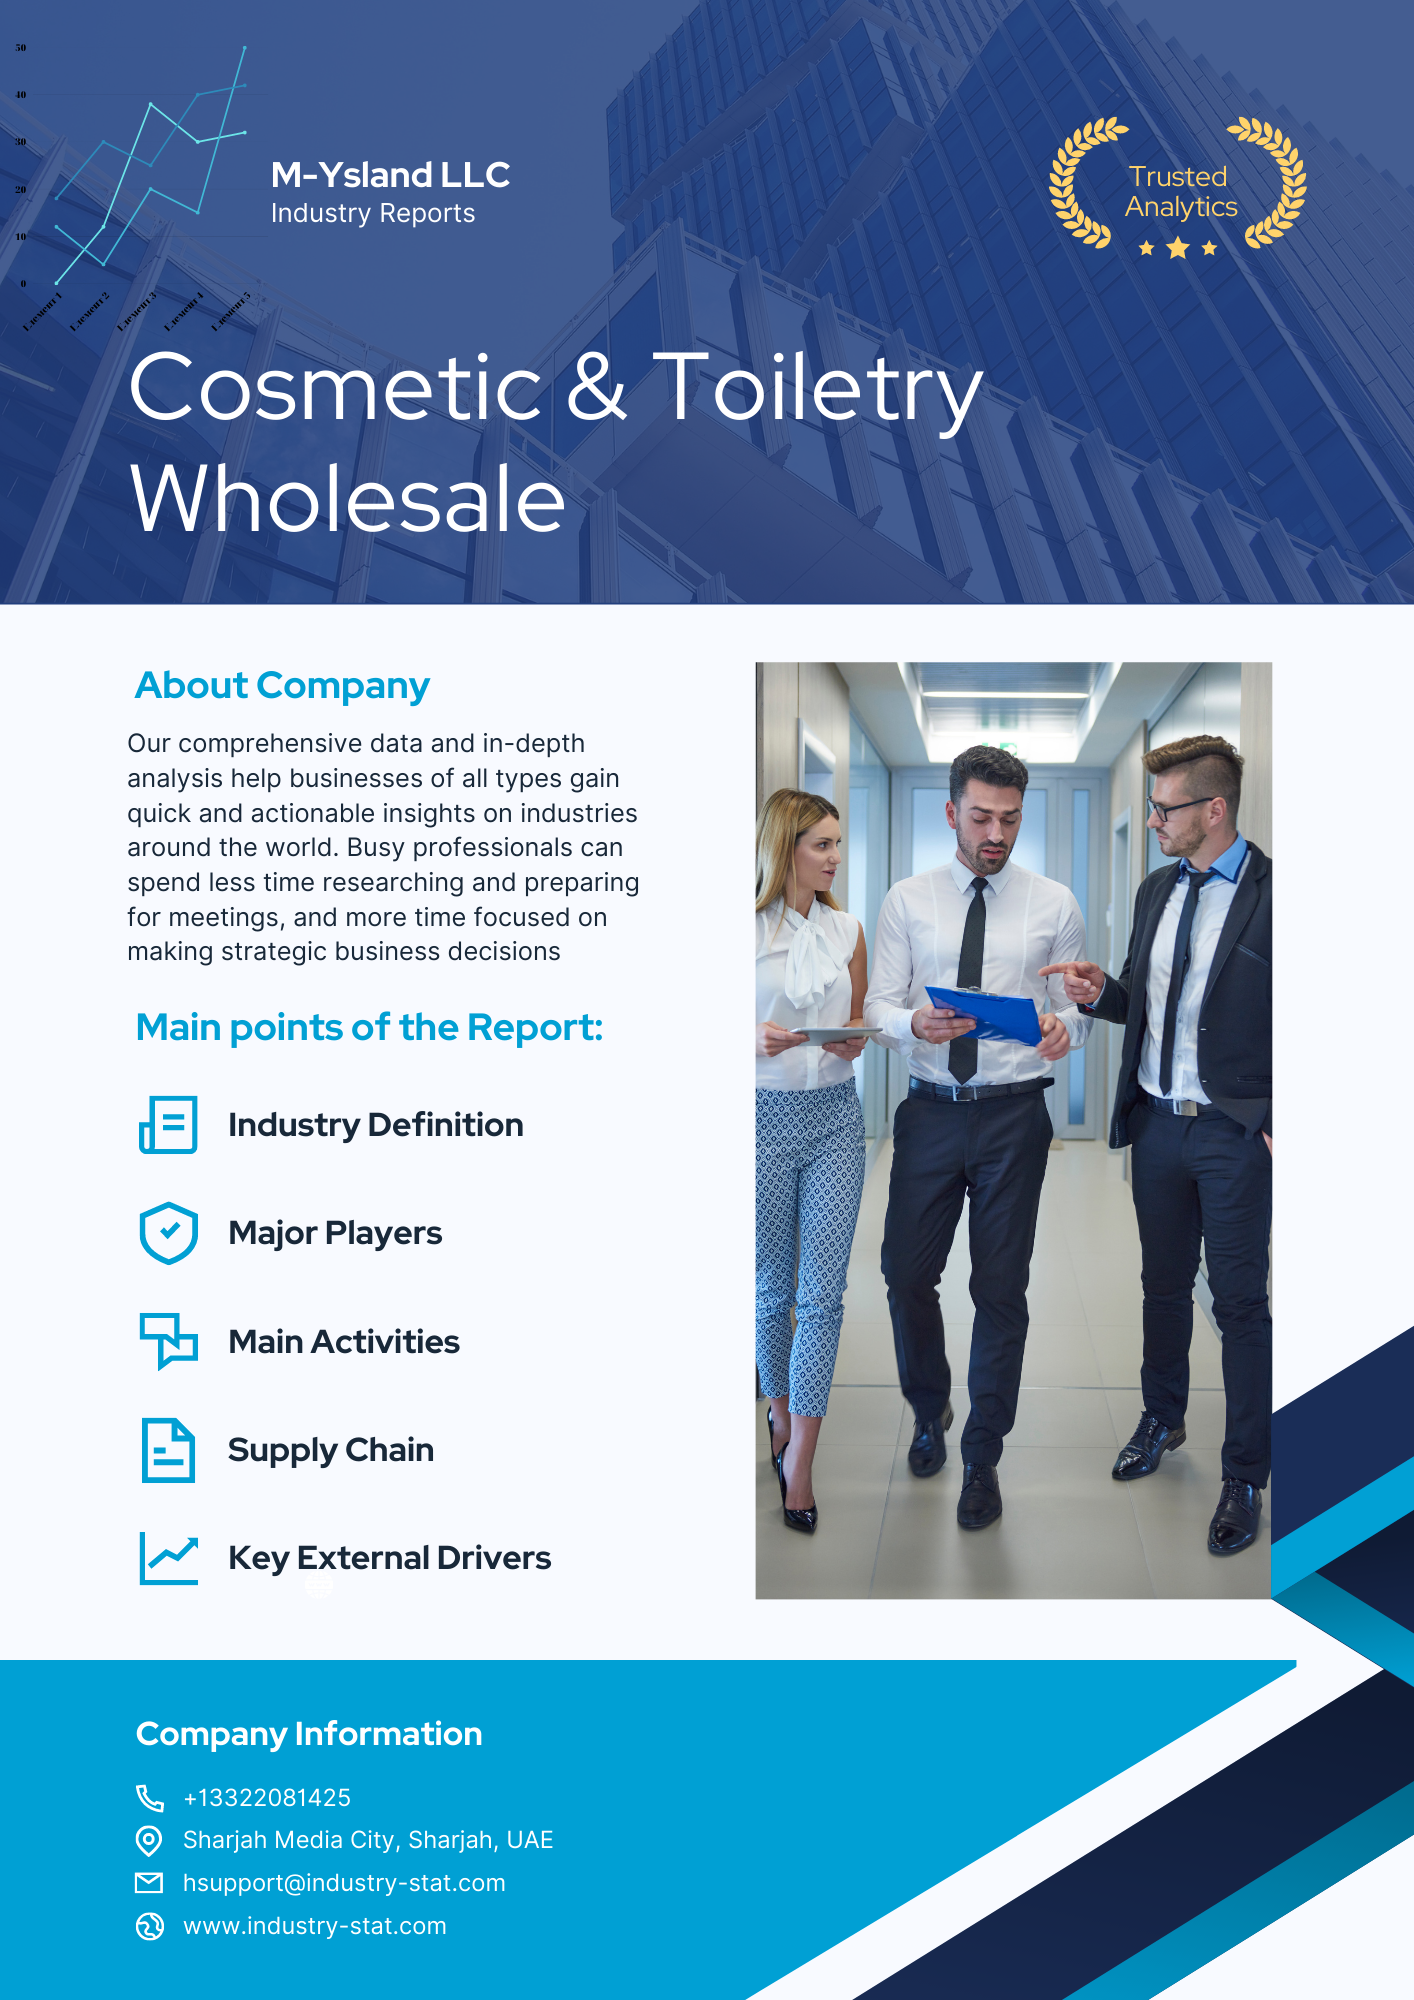 Cosmetic & Toiletry Wholesale